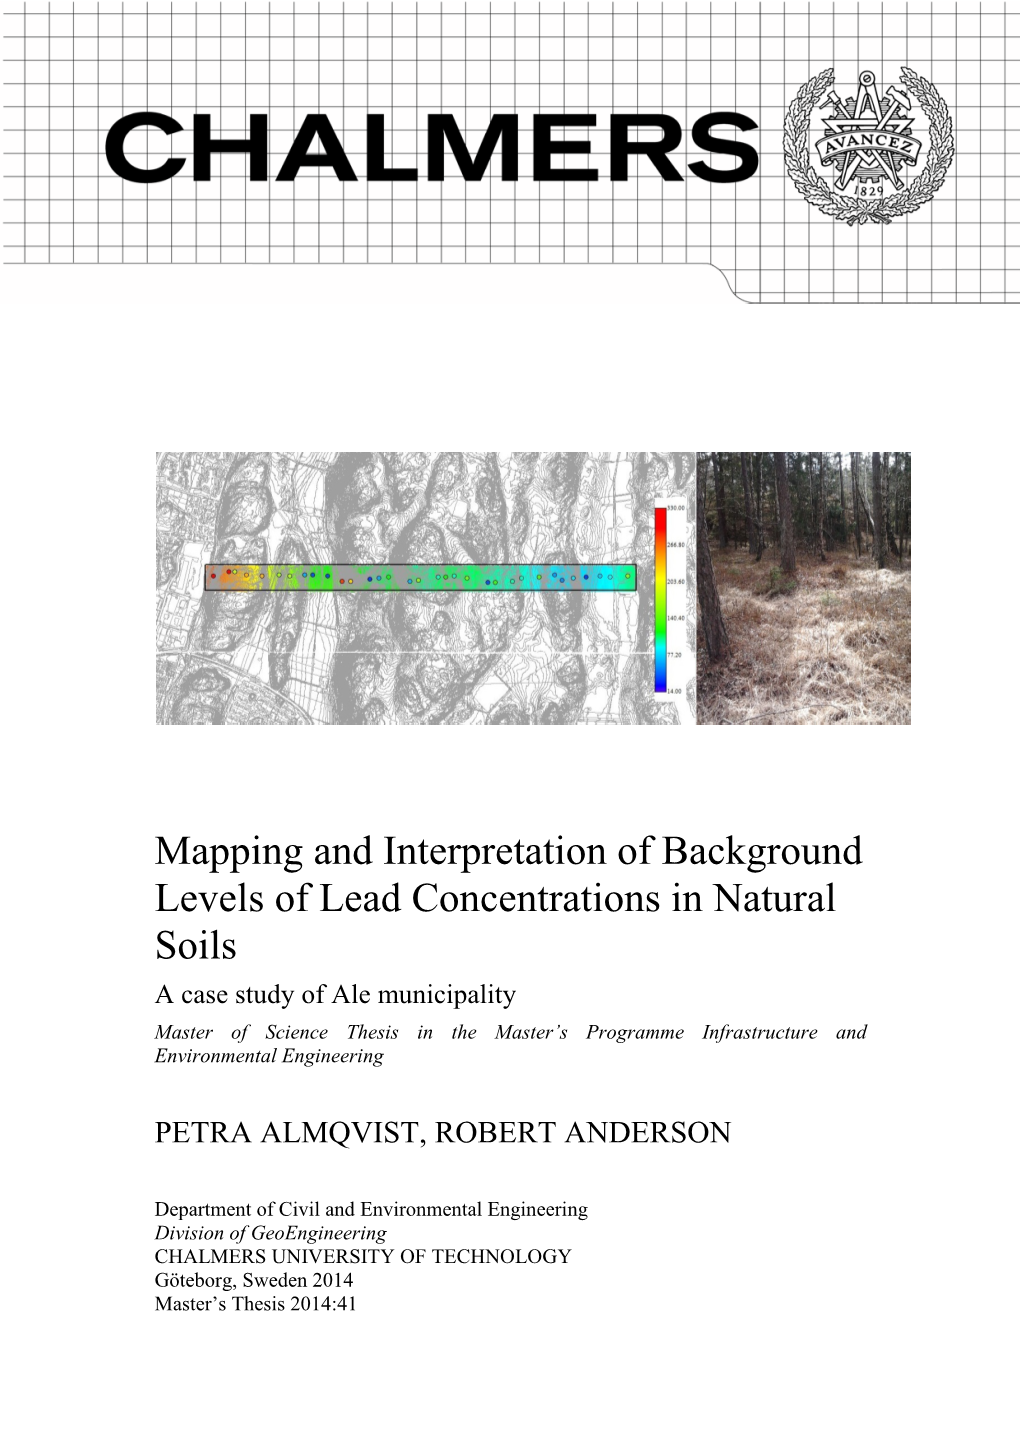 Mapping and Interpretation of Background Levels of Lead